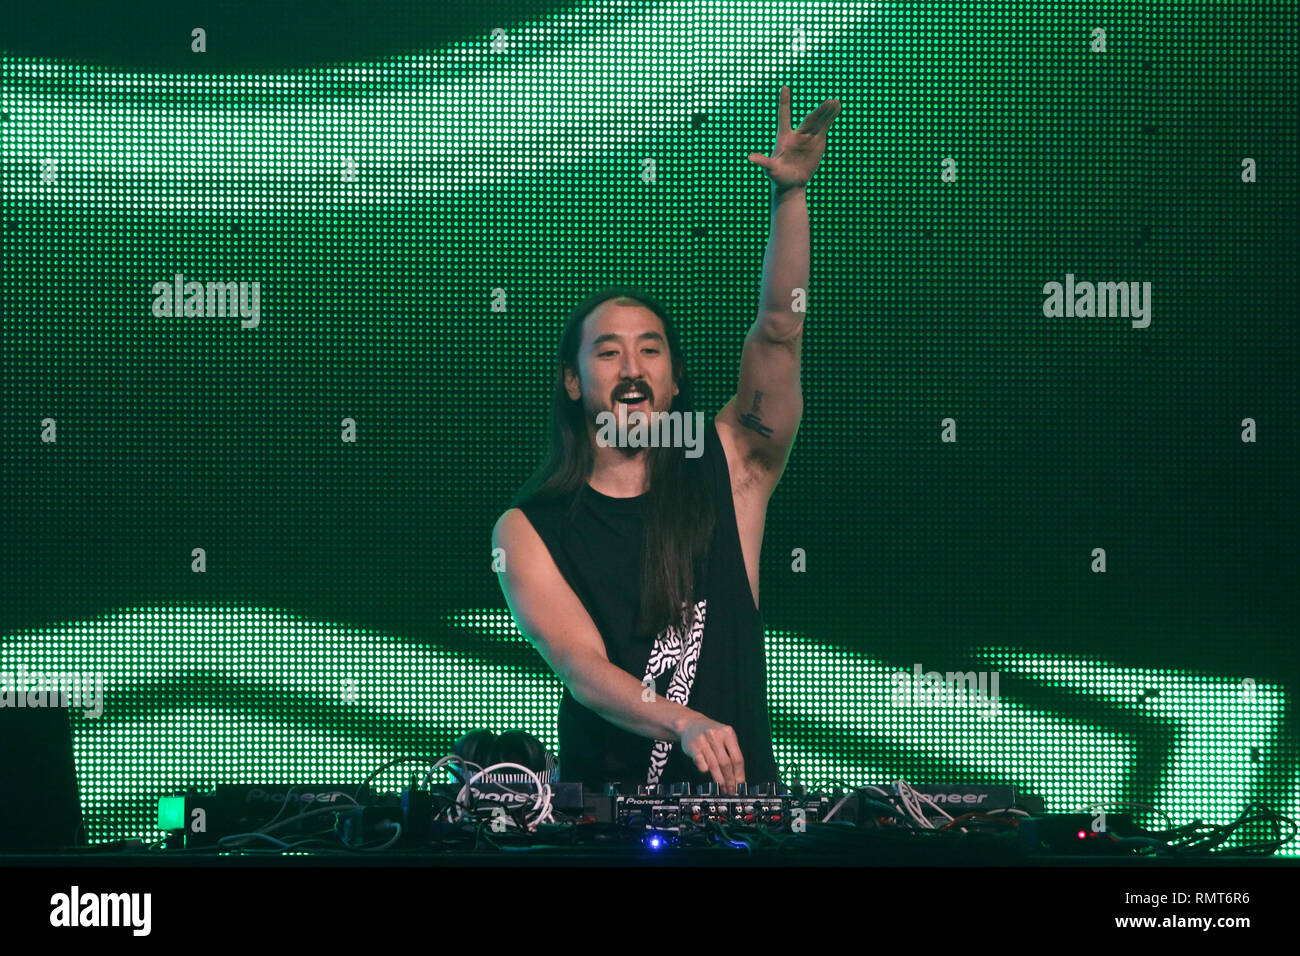 Electro house musician, record producer, club promoter Steve Aoki is shown performing on stage during a sold out concert appearance. Stock Photo